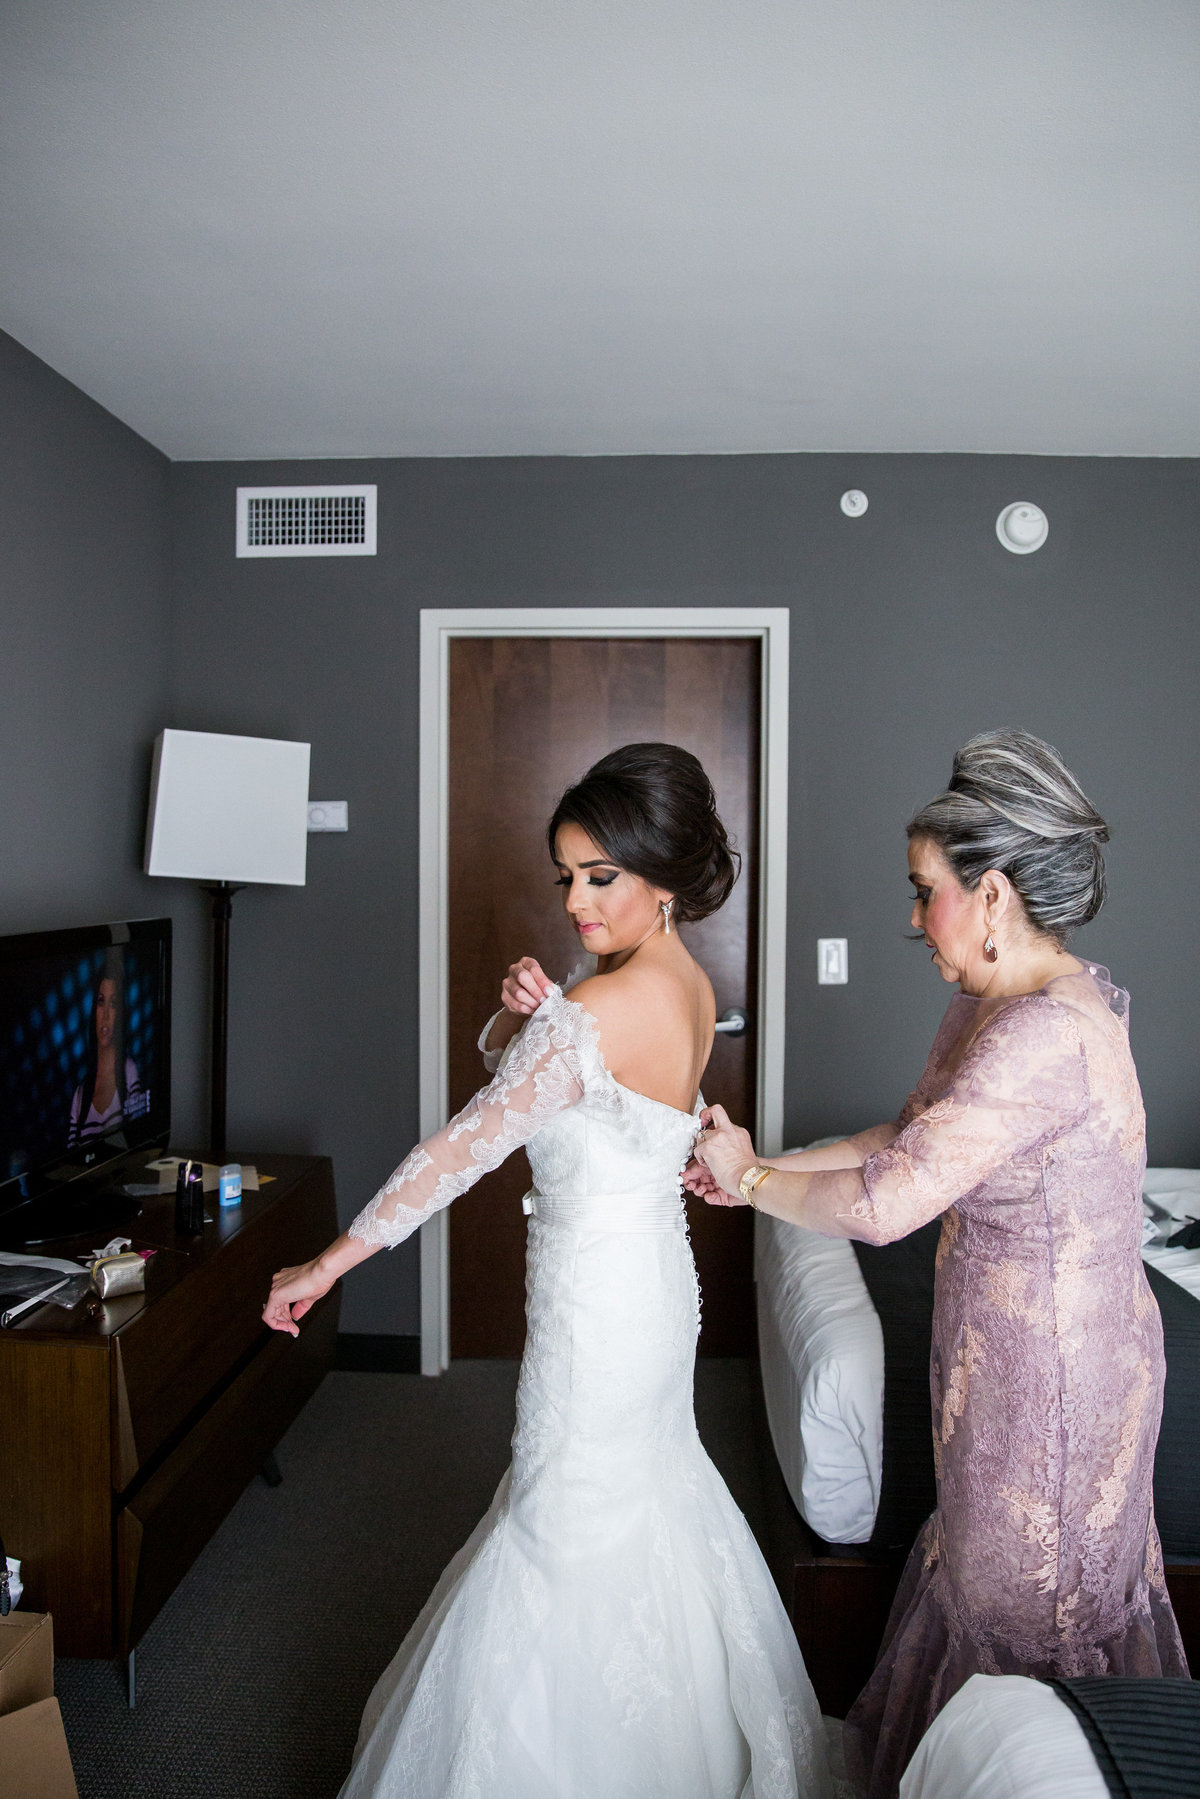 Mother of bride helps her daughter put on wedding gown before wedding ceremony at Contessa Hotel in downtown San Antonio